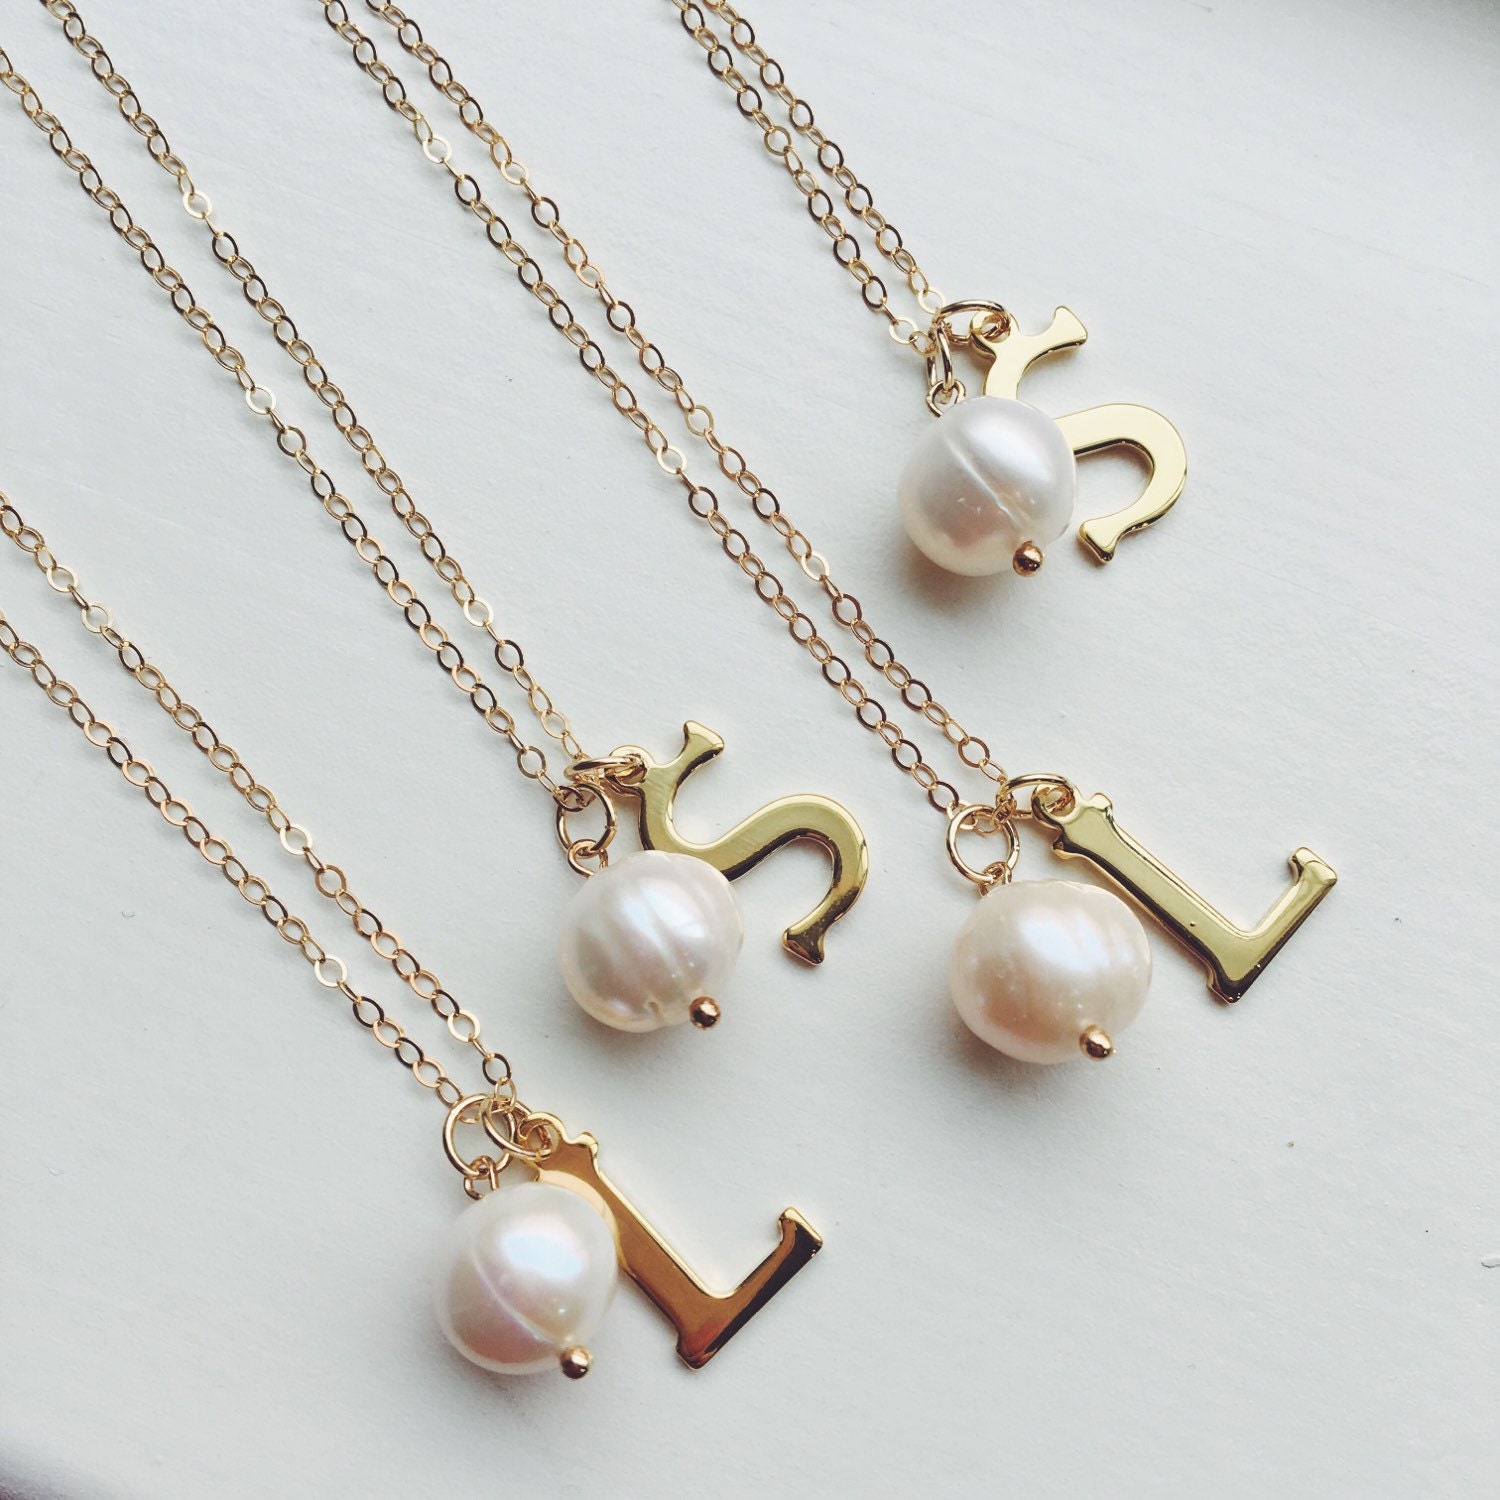 Gold Freshwater White Pearl Necklace with Initial - 14k gold filled chain - Bridesmaid Jewelry - Wedding Jewelry